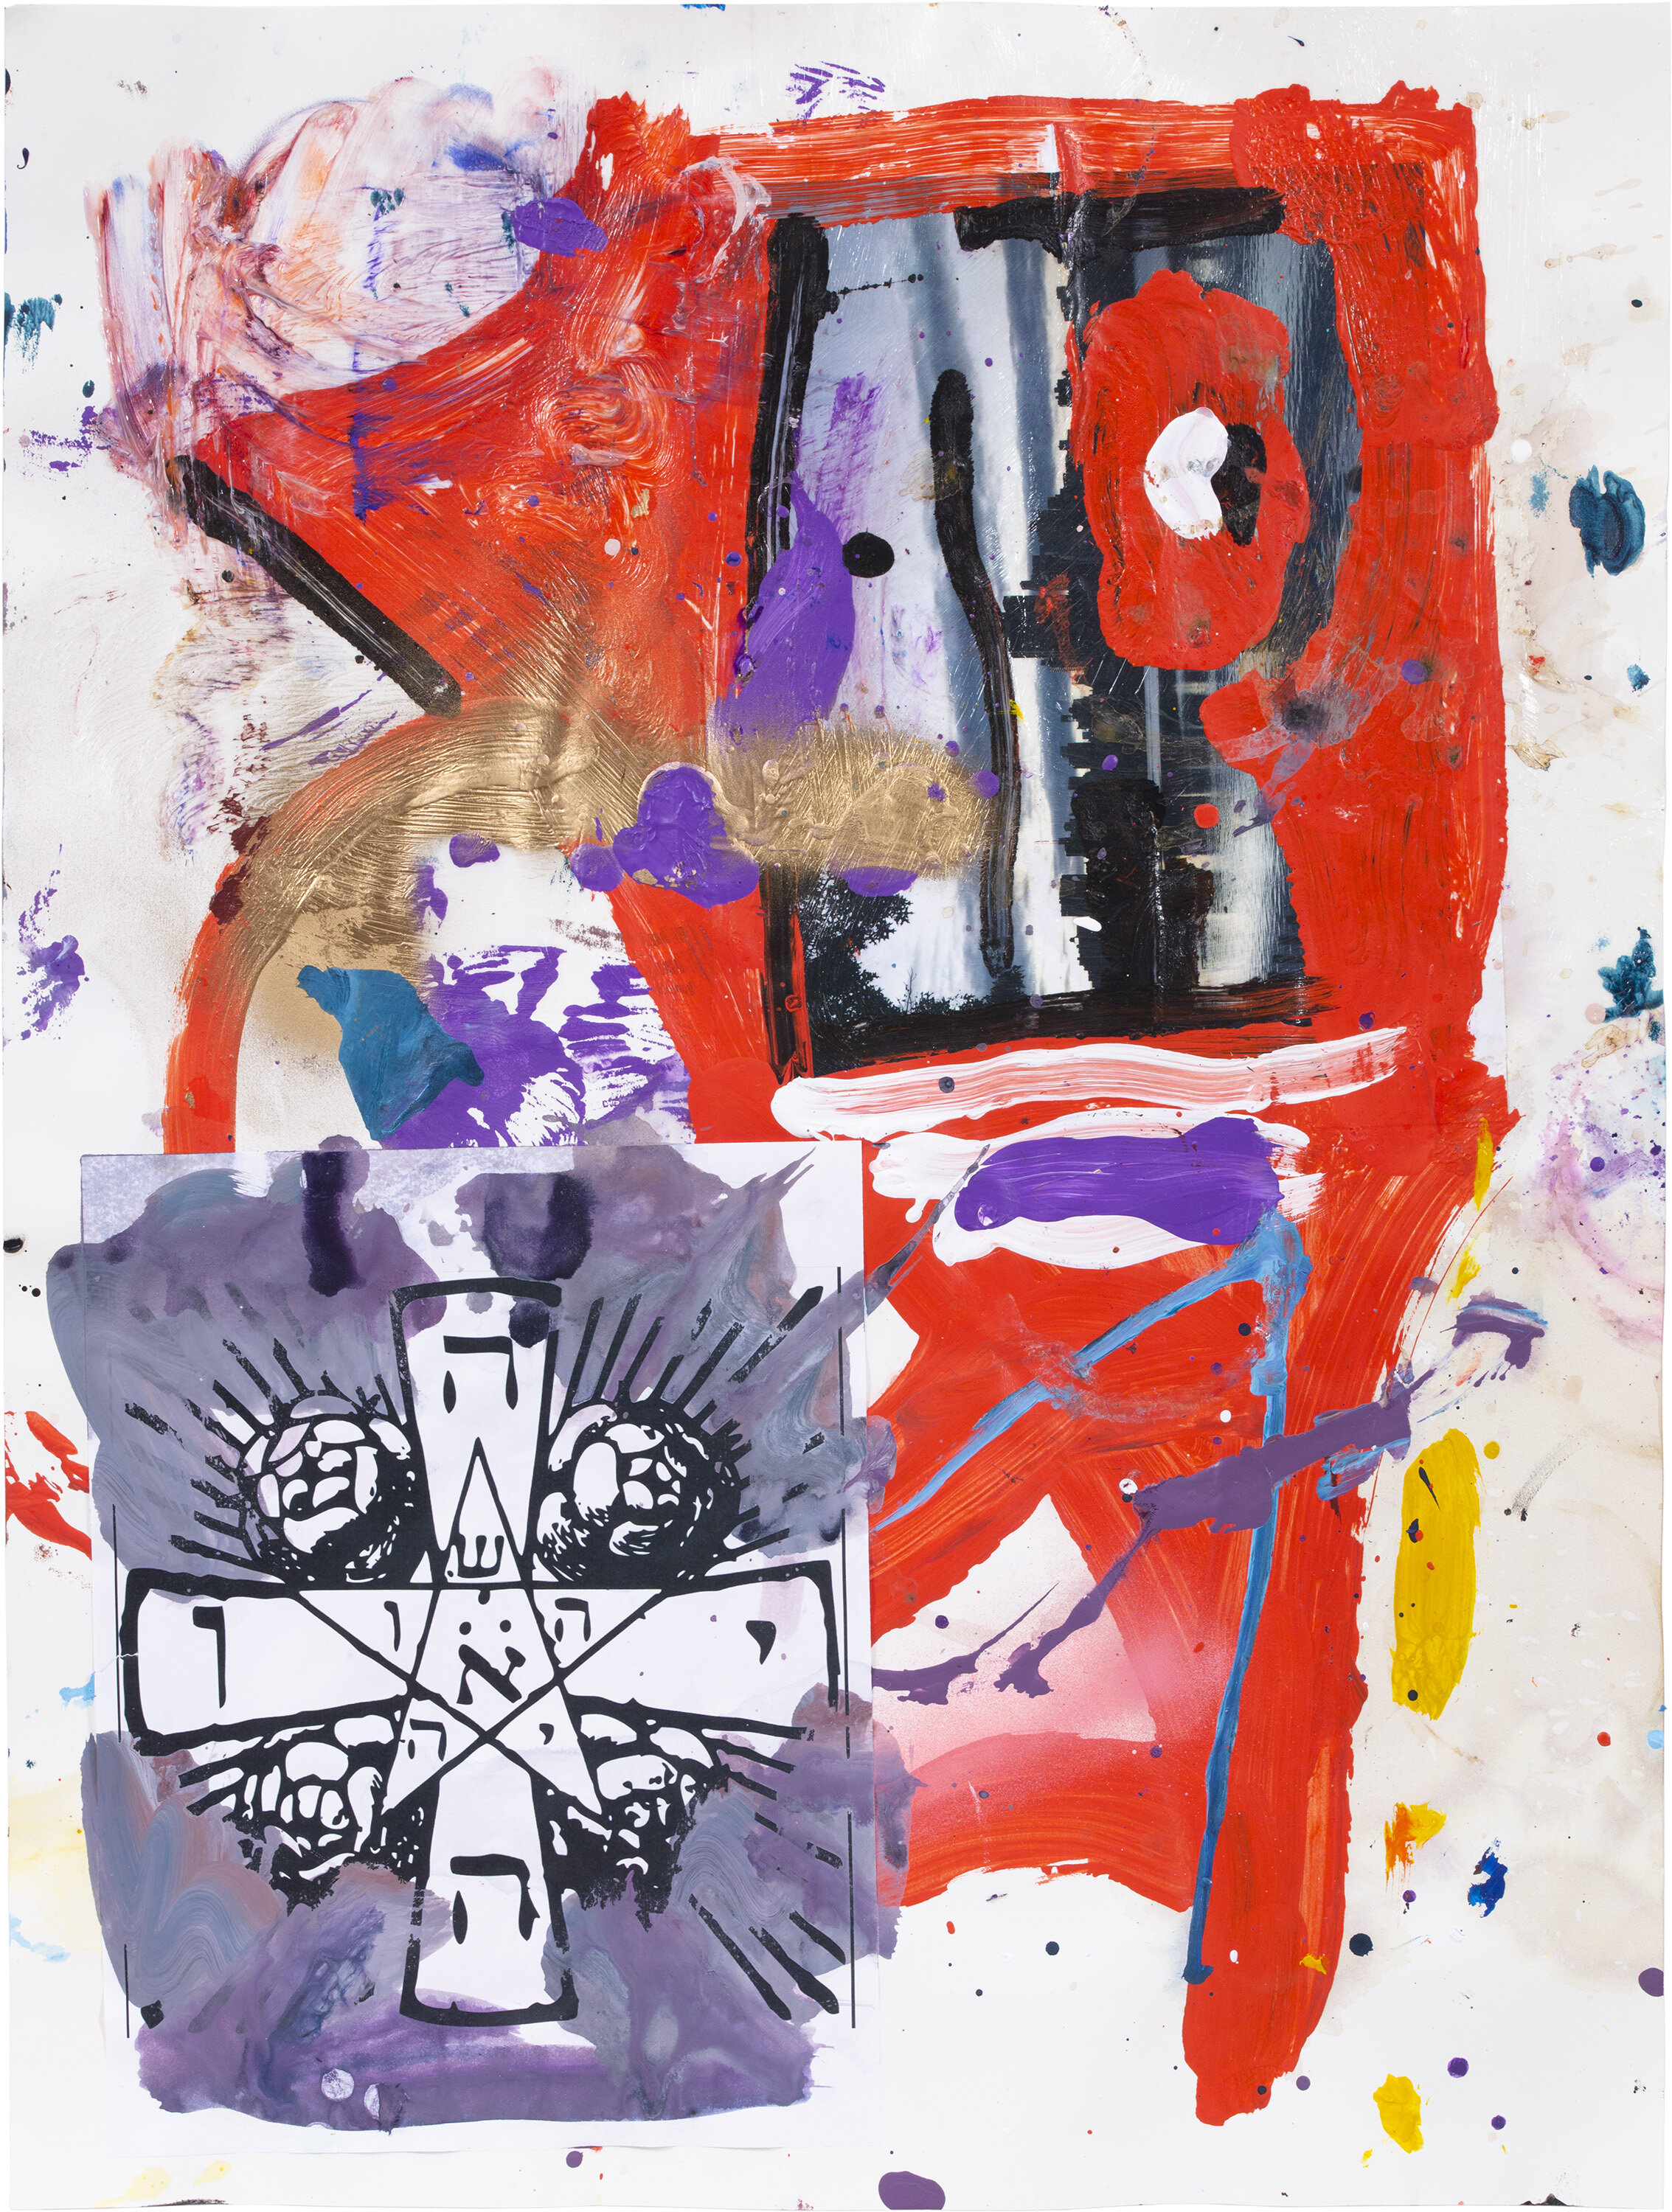  Drew Beattie and Ben Shepard   DBBS-DRW-2019-041   2019 acrylic, spray paint and collage on paper  24 x 18 inches 